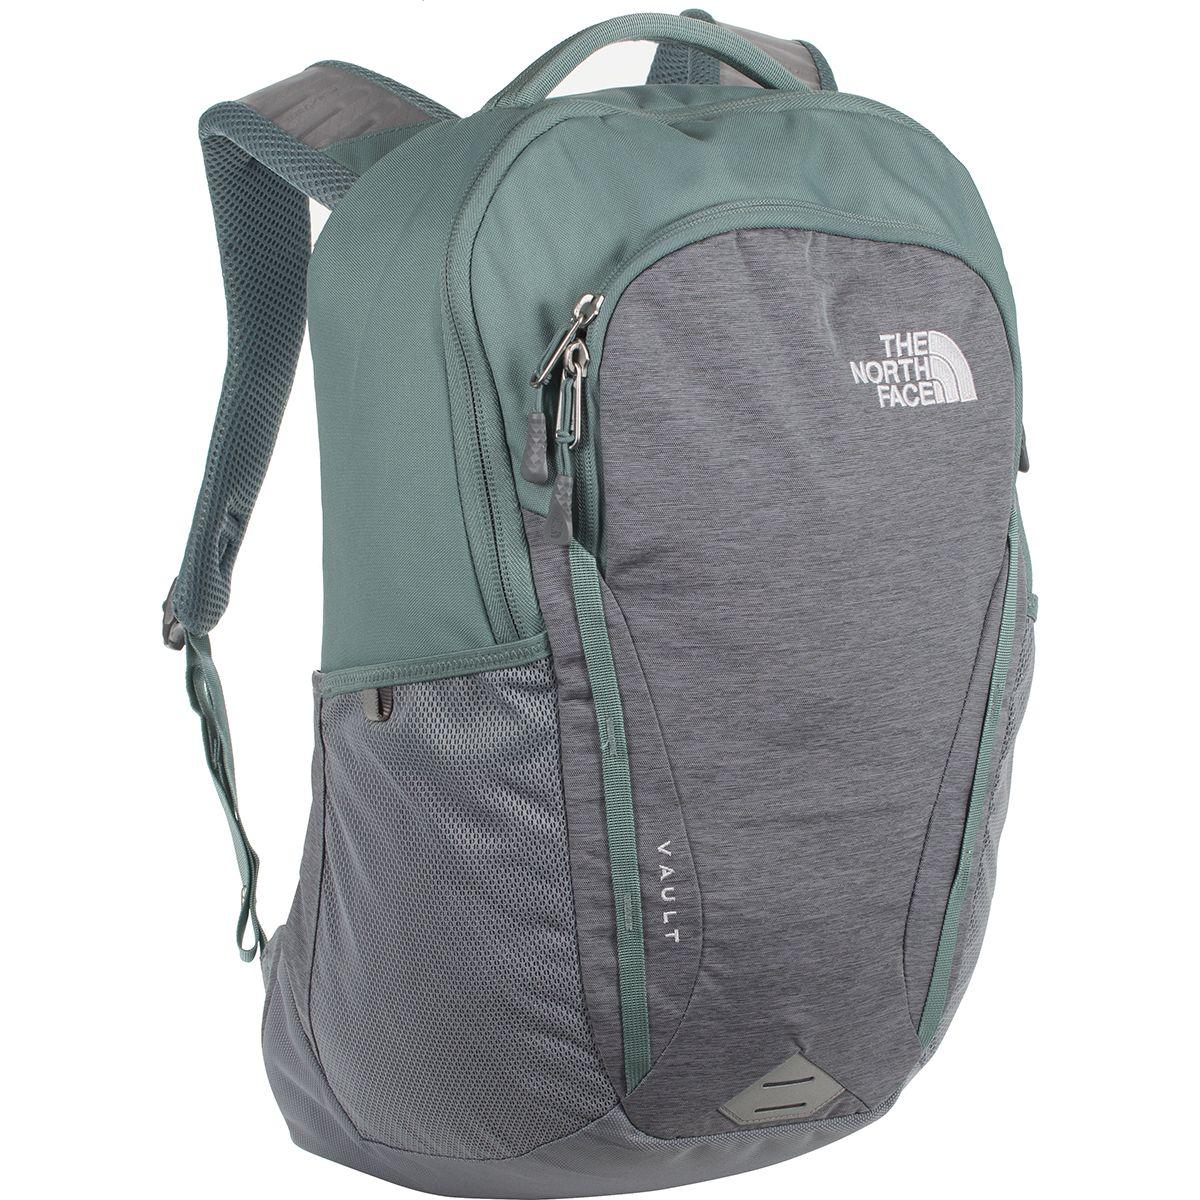 The North Face Synthetic Vault 26l Backpack in Gray - Lyst